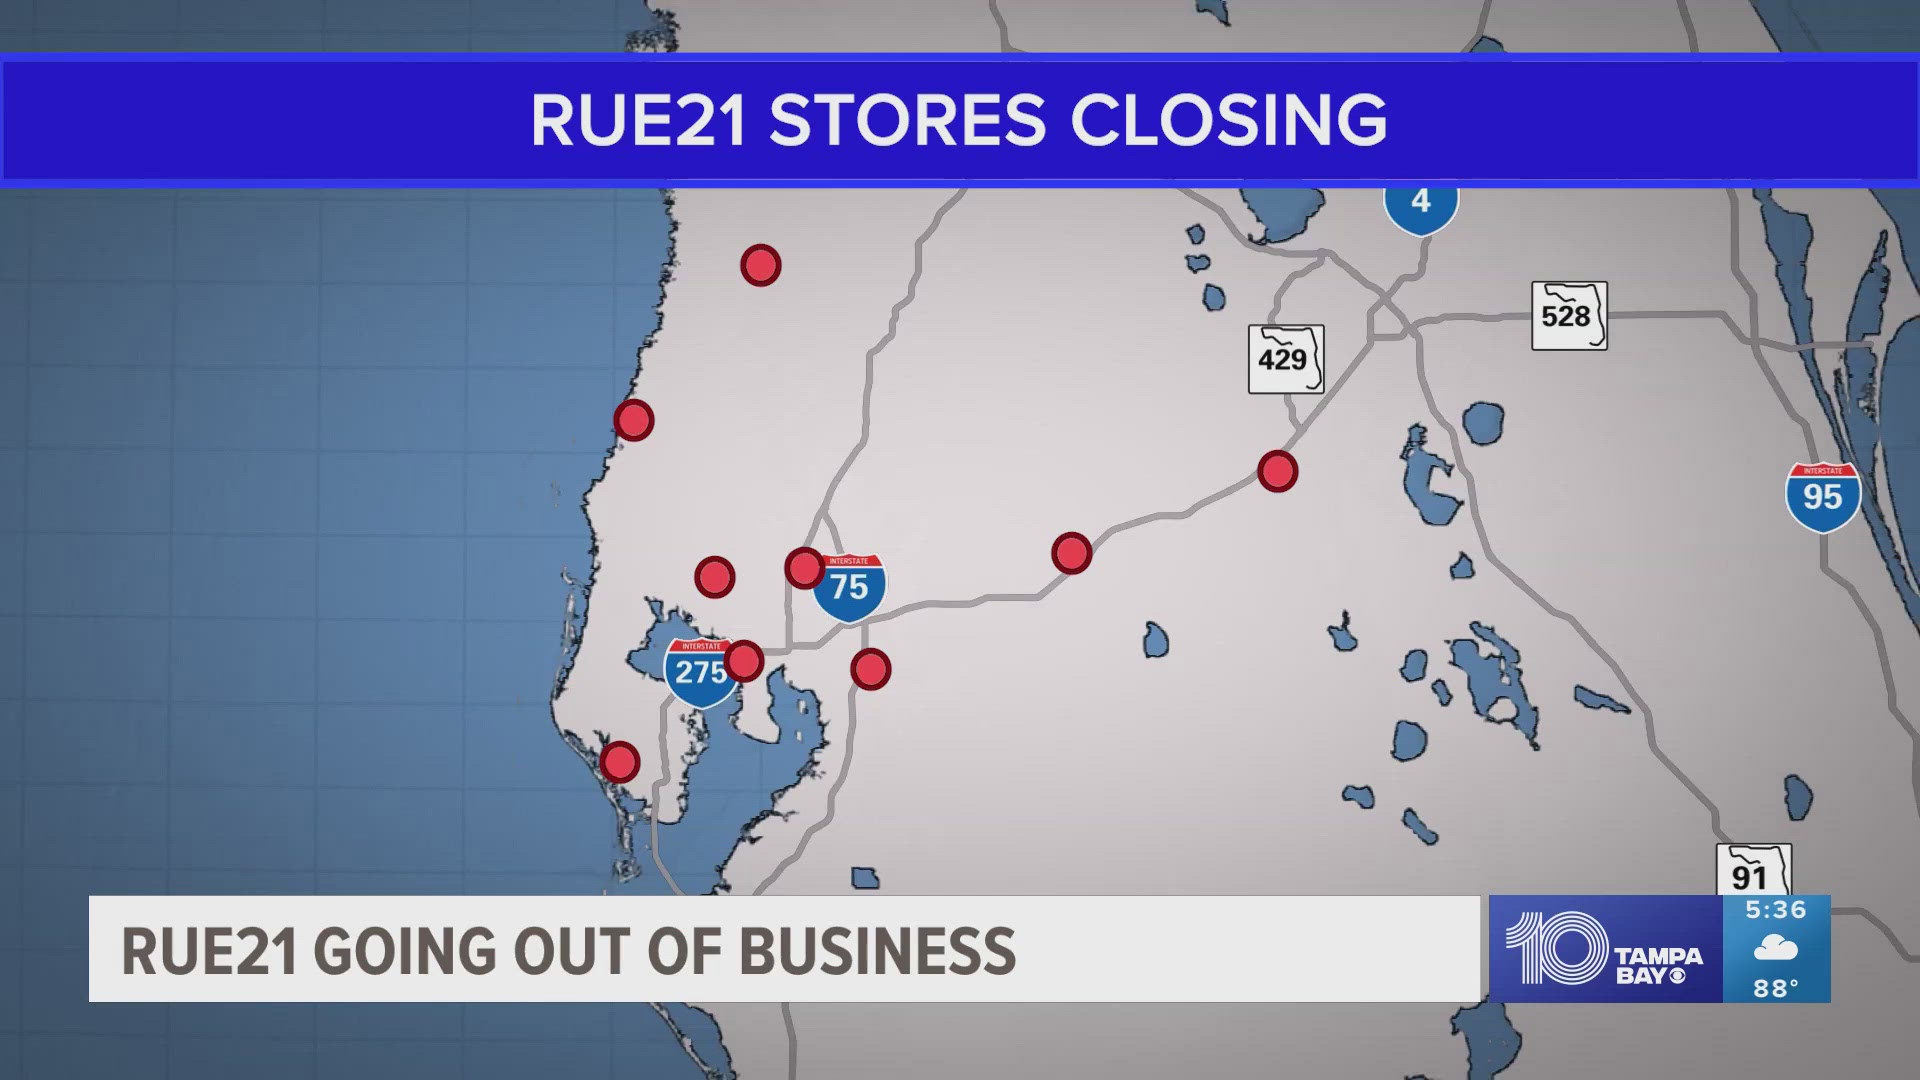 rue21 has more than 540 stores in 45 states across the country.